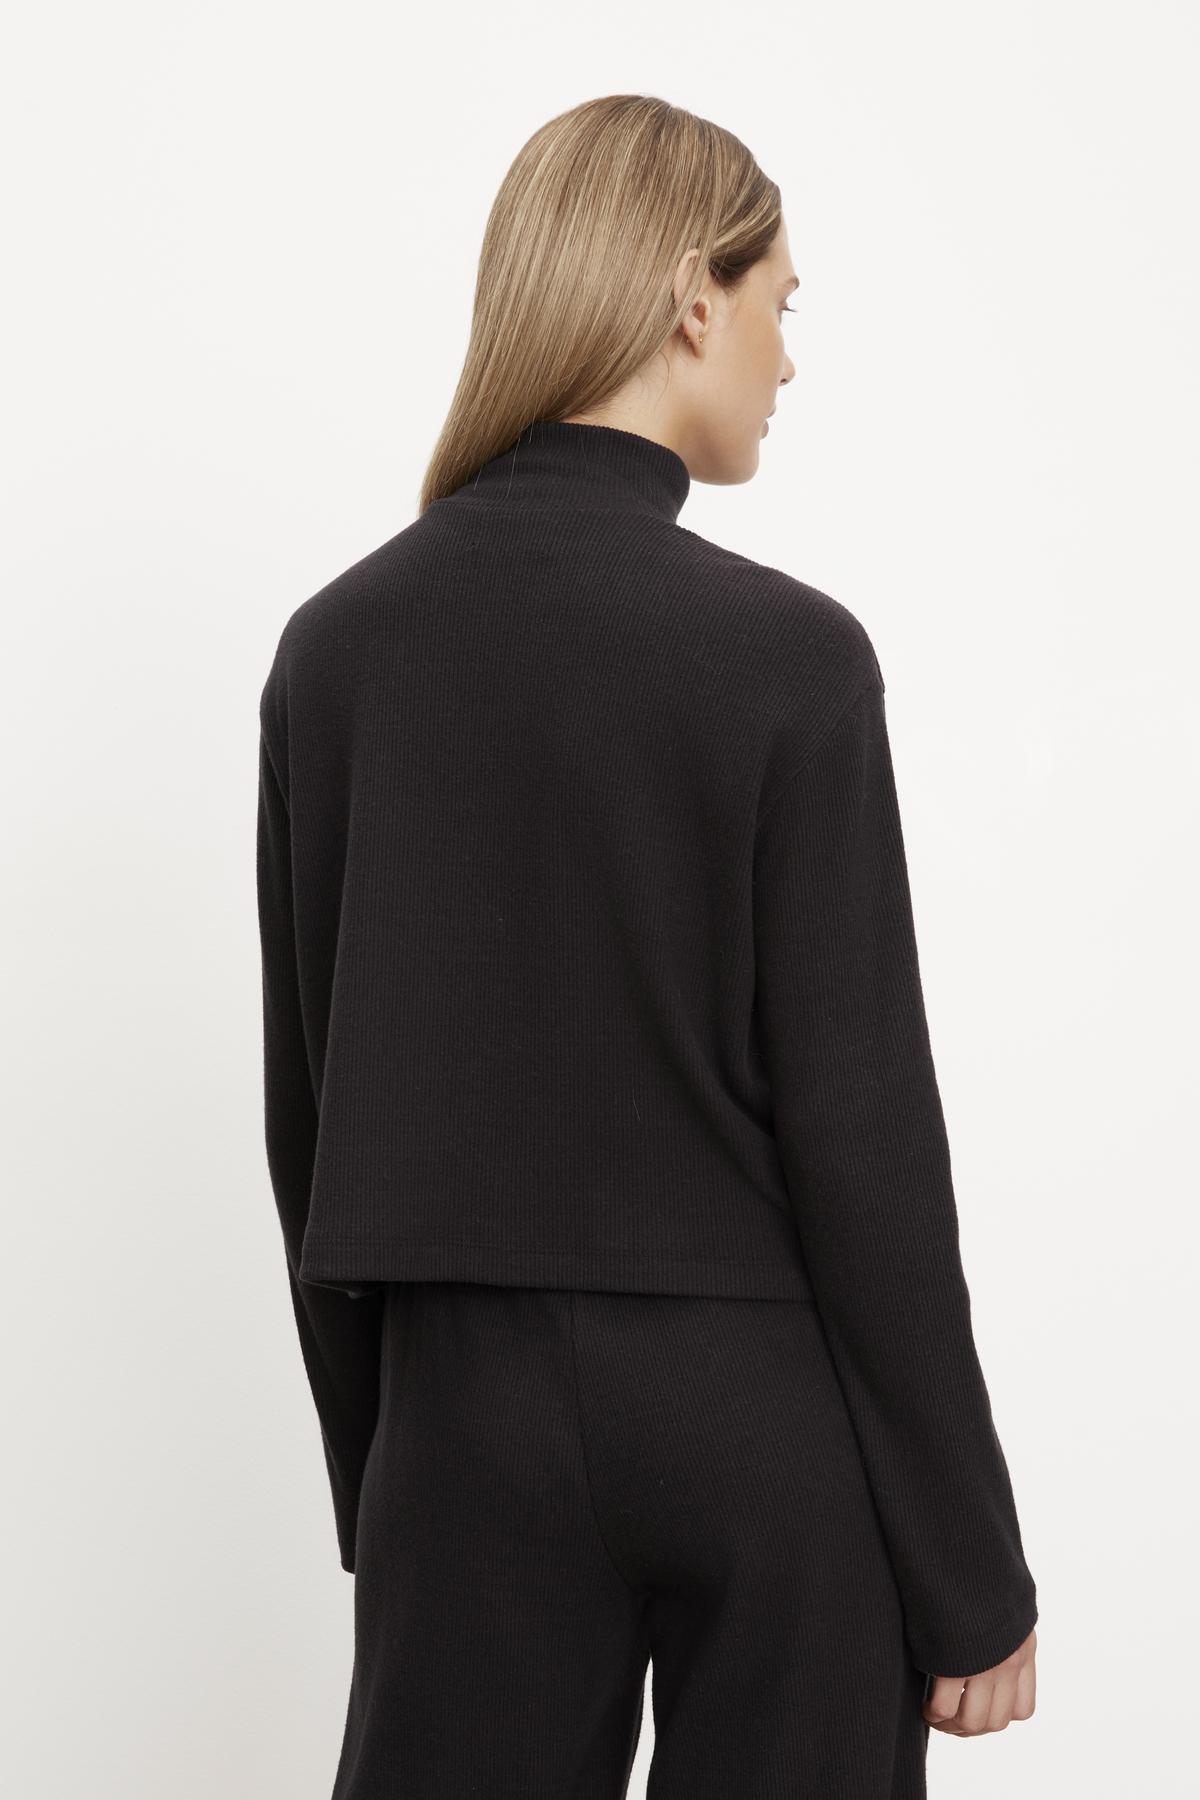   The back view of a person wearing a Velvet by Graham & Spencer ALEC BRUSHED RIB TURTLENECK TOP. 